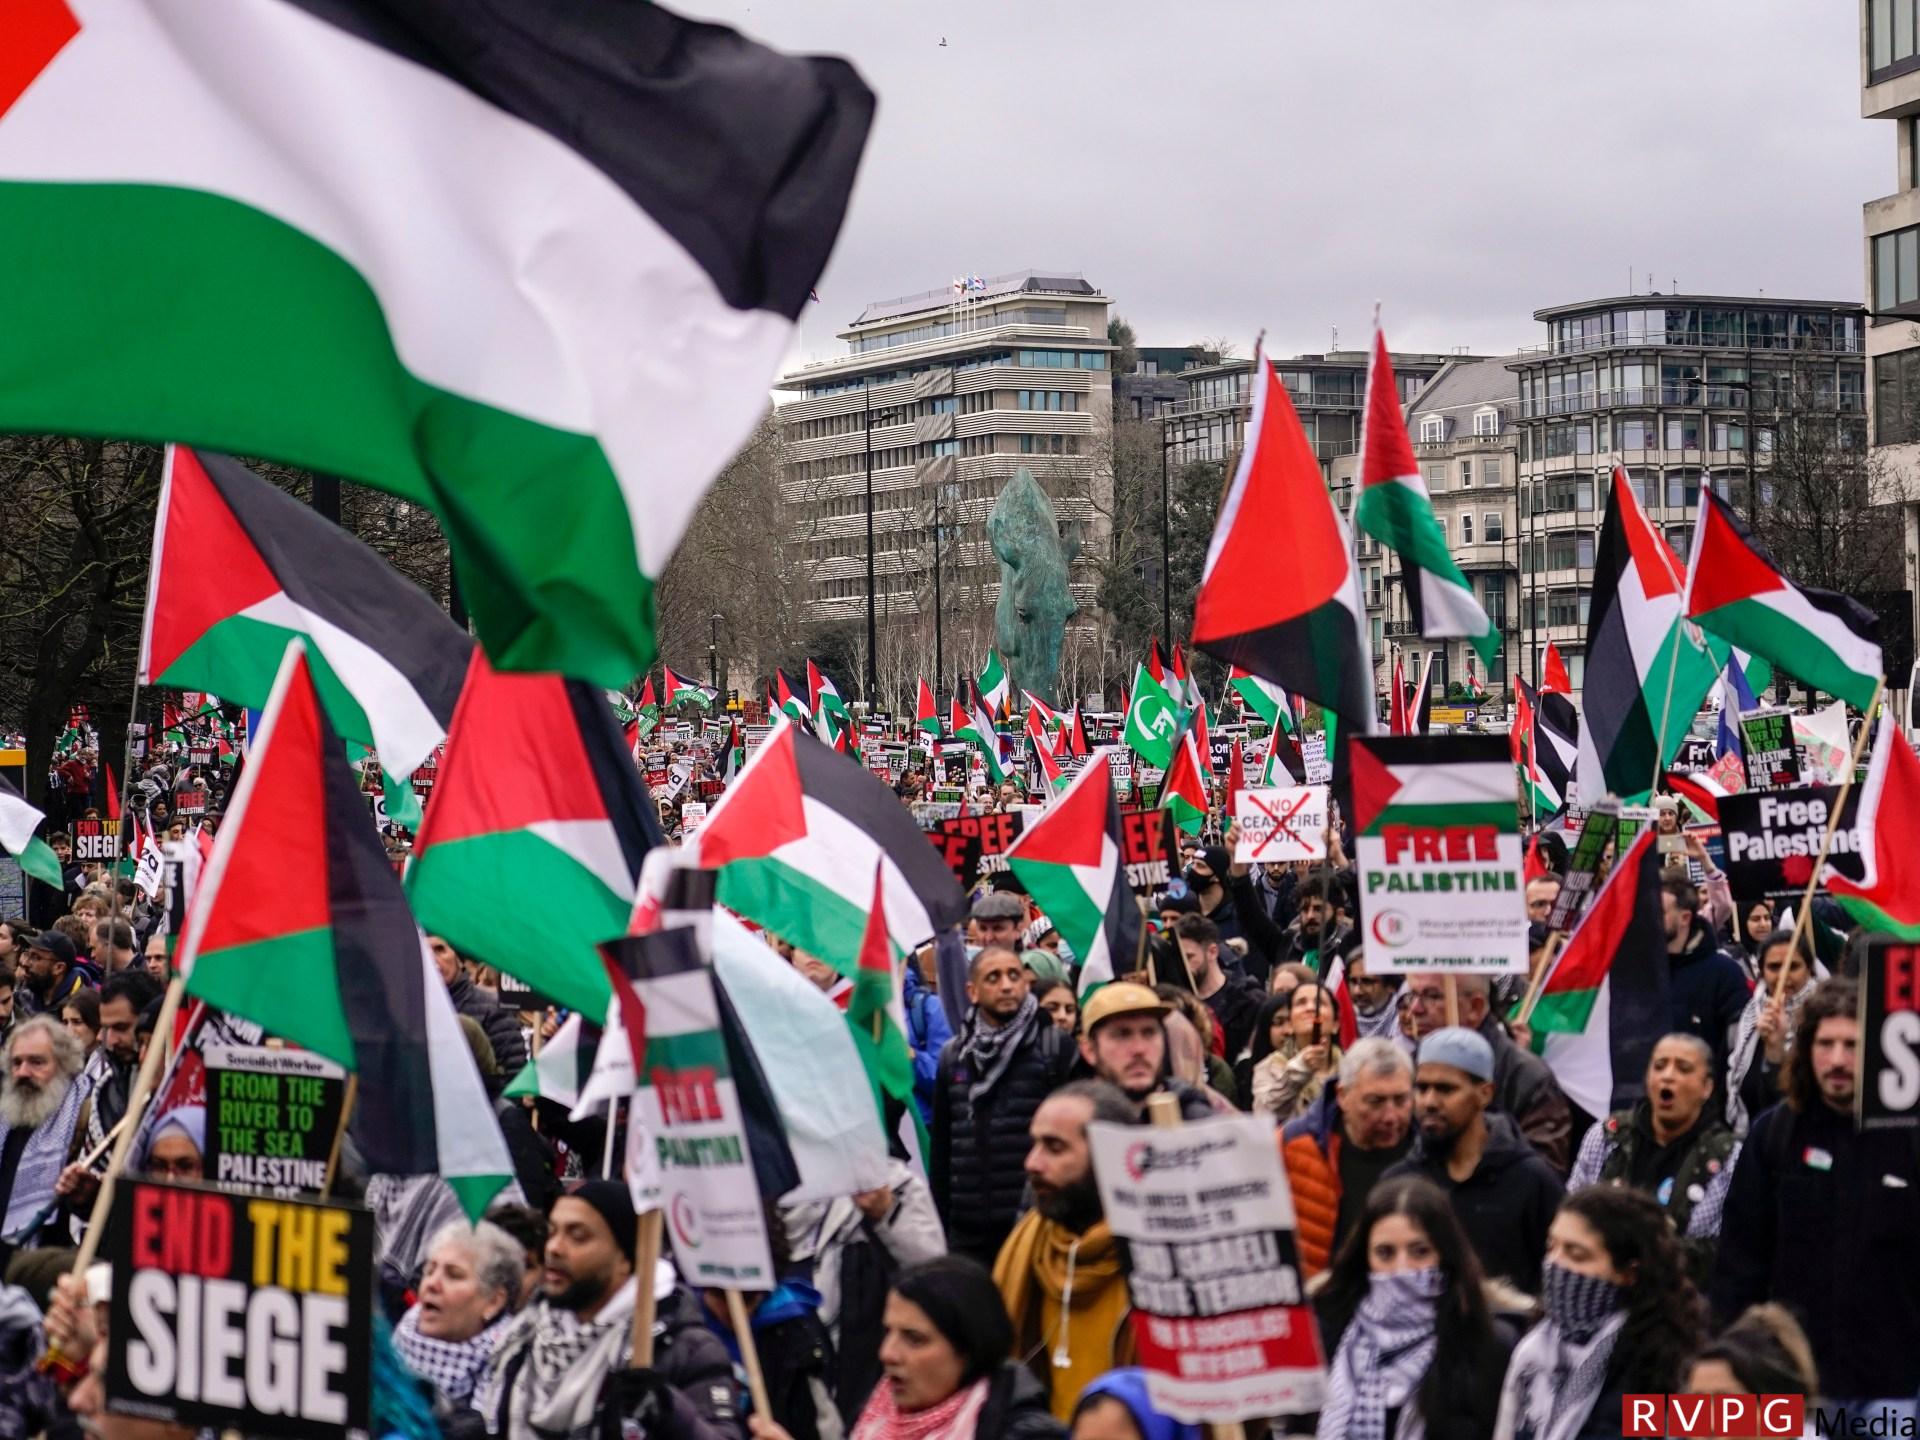 Across the Western world, public opinion on Palestine is finally changing